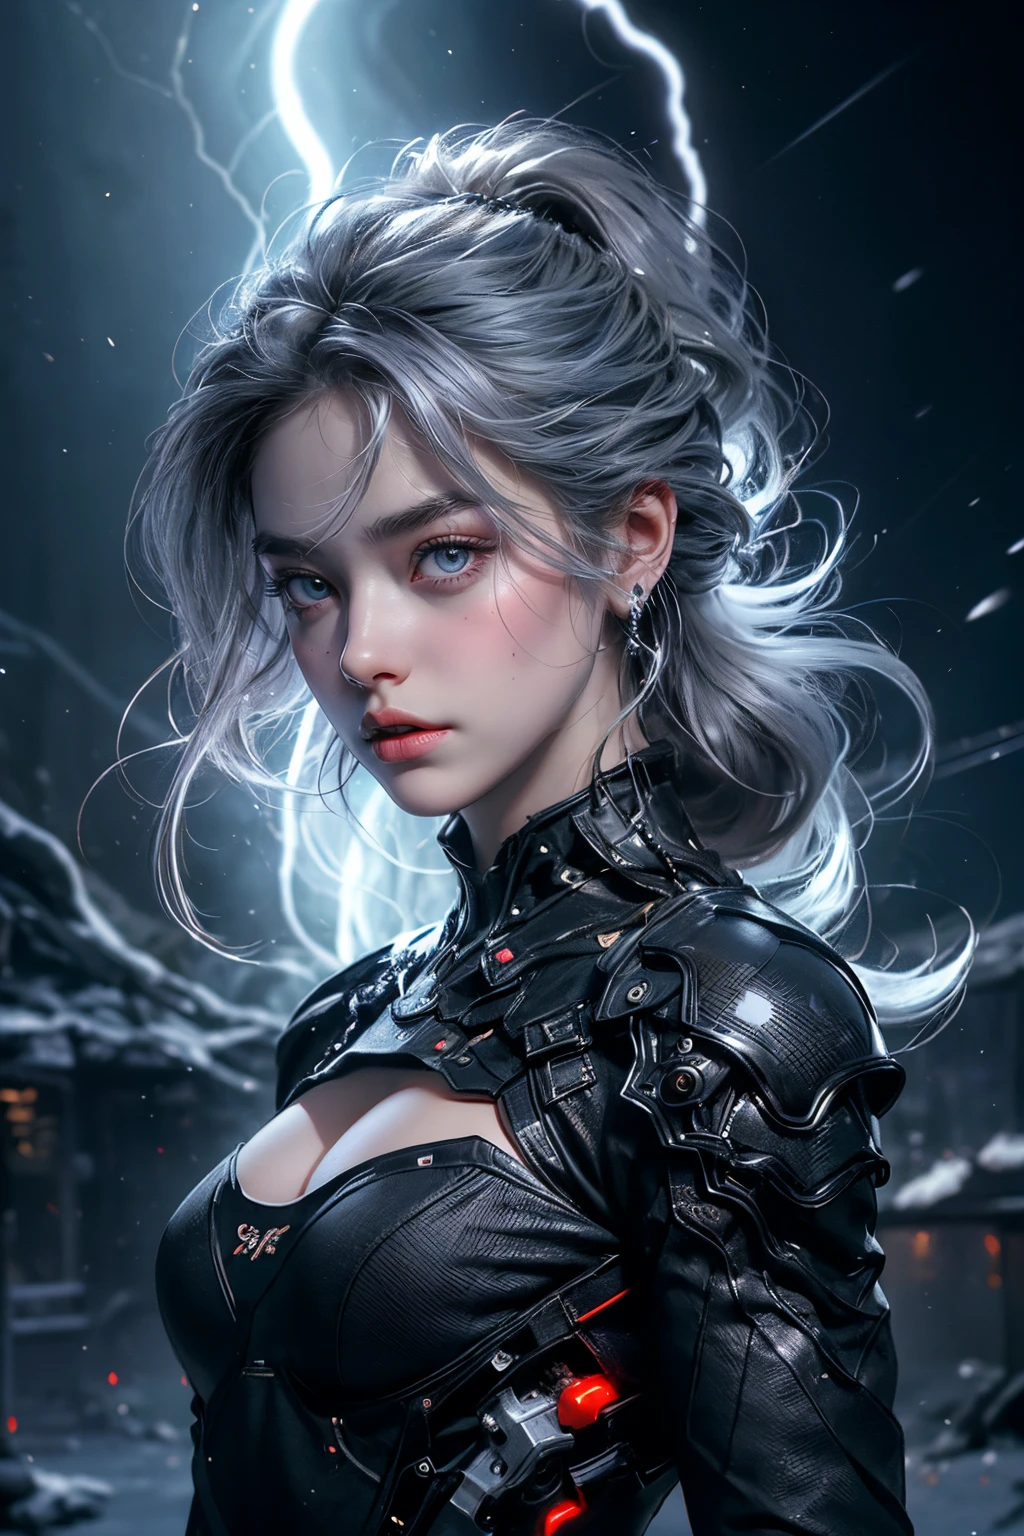 ticker mechanism, Beautiful eyes, Upper body, （Mechanic Armor）, Portrait、abyss、lightning from hand、flying though the air、flawless、Neon light, 8K, raw, Best Quality, masutepiece, 超A high resolution, Colorful, (medium wide shot), (Dynamic perspective), foco nítido , (depth of fields, Bokeh:1.3), extremely detailed eye and face,ninjartist, Beautiful detailed eyes、Black gold, Trimmed gear:1.2), ((masutepiece, Best Quality)), Detailed background, Inside the spacecraft、Hold your weapon、（Gray hair）、brue eyes、poneyTail、dirty、bio luminescent、lots of crescent moons、Photographed with Canon R5、Dark Fantasy,​masterpiece,connected to the plug、spectrum、Space City、Highly detailed beautiful porcelain profile female android face、Complex 3D rendering of a headset、cyborgs、roboticparts、150mm、Beautiful studio soft lights、Rim Light、Vivid details、luxuriouscyberpunk、Ren Hao、surrealistic、Anatomical、face muscles、cable electric wireicrochips、elegent、beatiful backgrounds、octan render、HR Giger Style、8K、top-quality、​masterpiece、illustratio、extremely delicate and beautiful、ighly detailed、nffsw ,Unity ,wall-paper,magnifica, Attention to detail, ​masterpiece,top-quality,Official art,Highly detailed ticker Unity 8K wallpapers、、Silver Halmet、((full body Esbian))